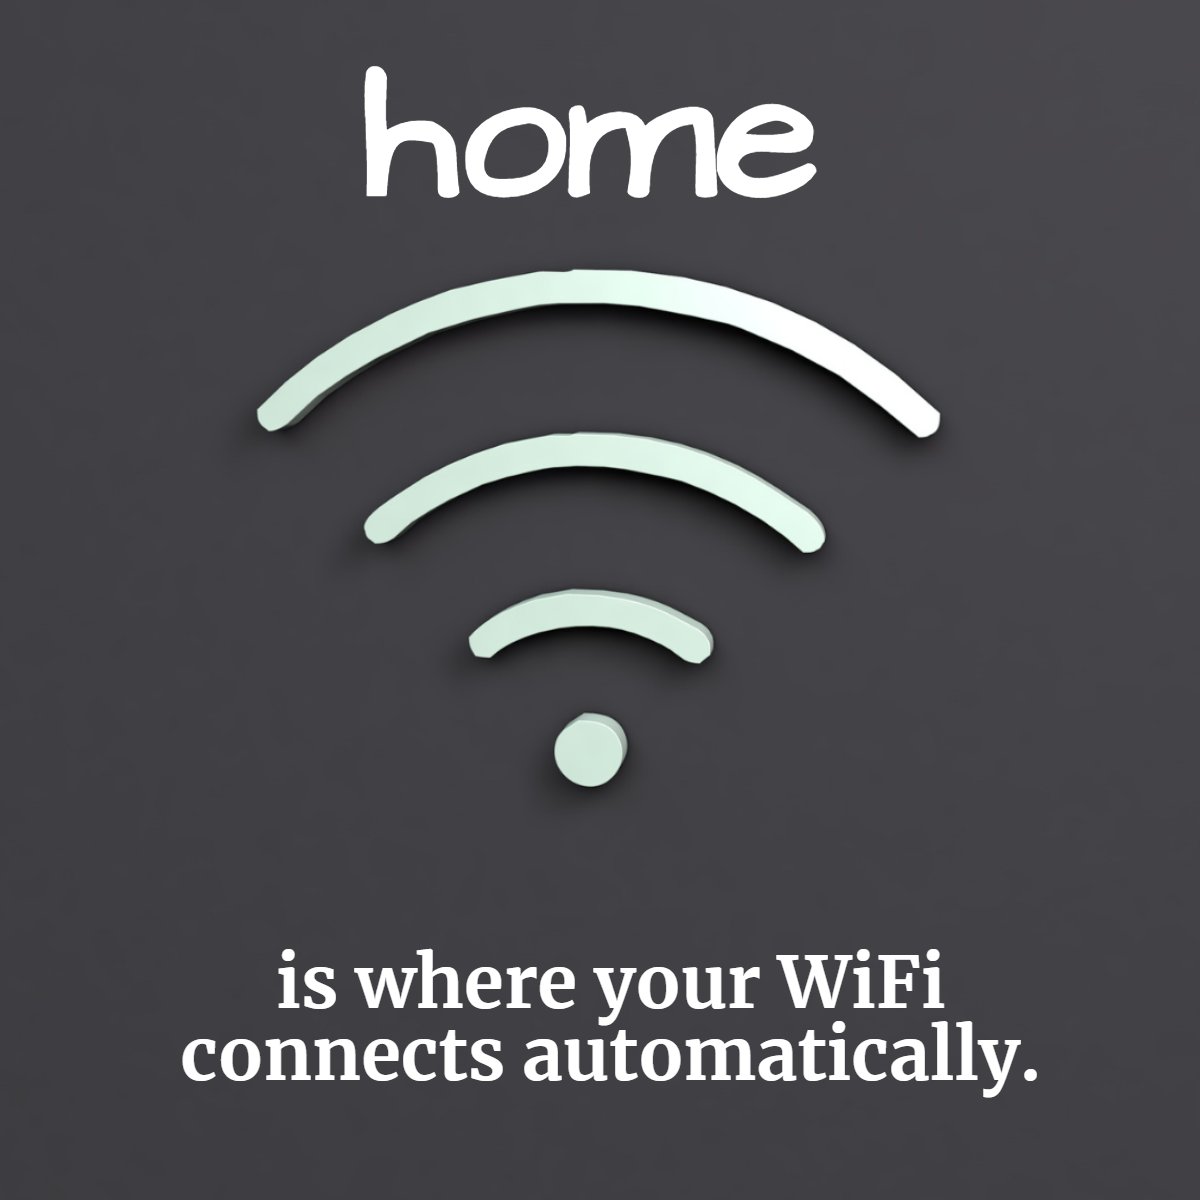 Home is where your WiFi... Connects automatically. 📱📶

#home #wifi #stayhome #homestyle #hometime #homesofinstagram #wearehome
 #realestatetips #realestate #realestateagent #realtor #realestatelife #realestateadvice #sellers #buyers #homebuyers #remax #Virginia